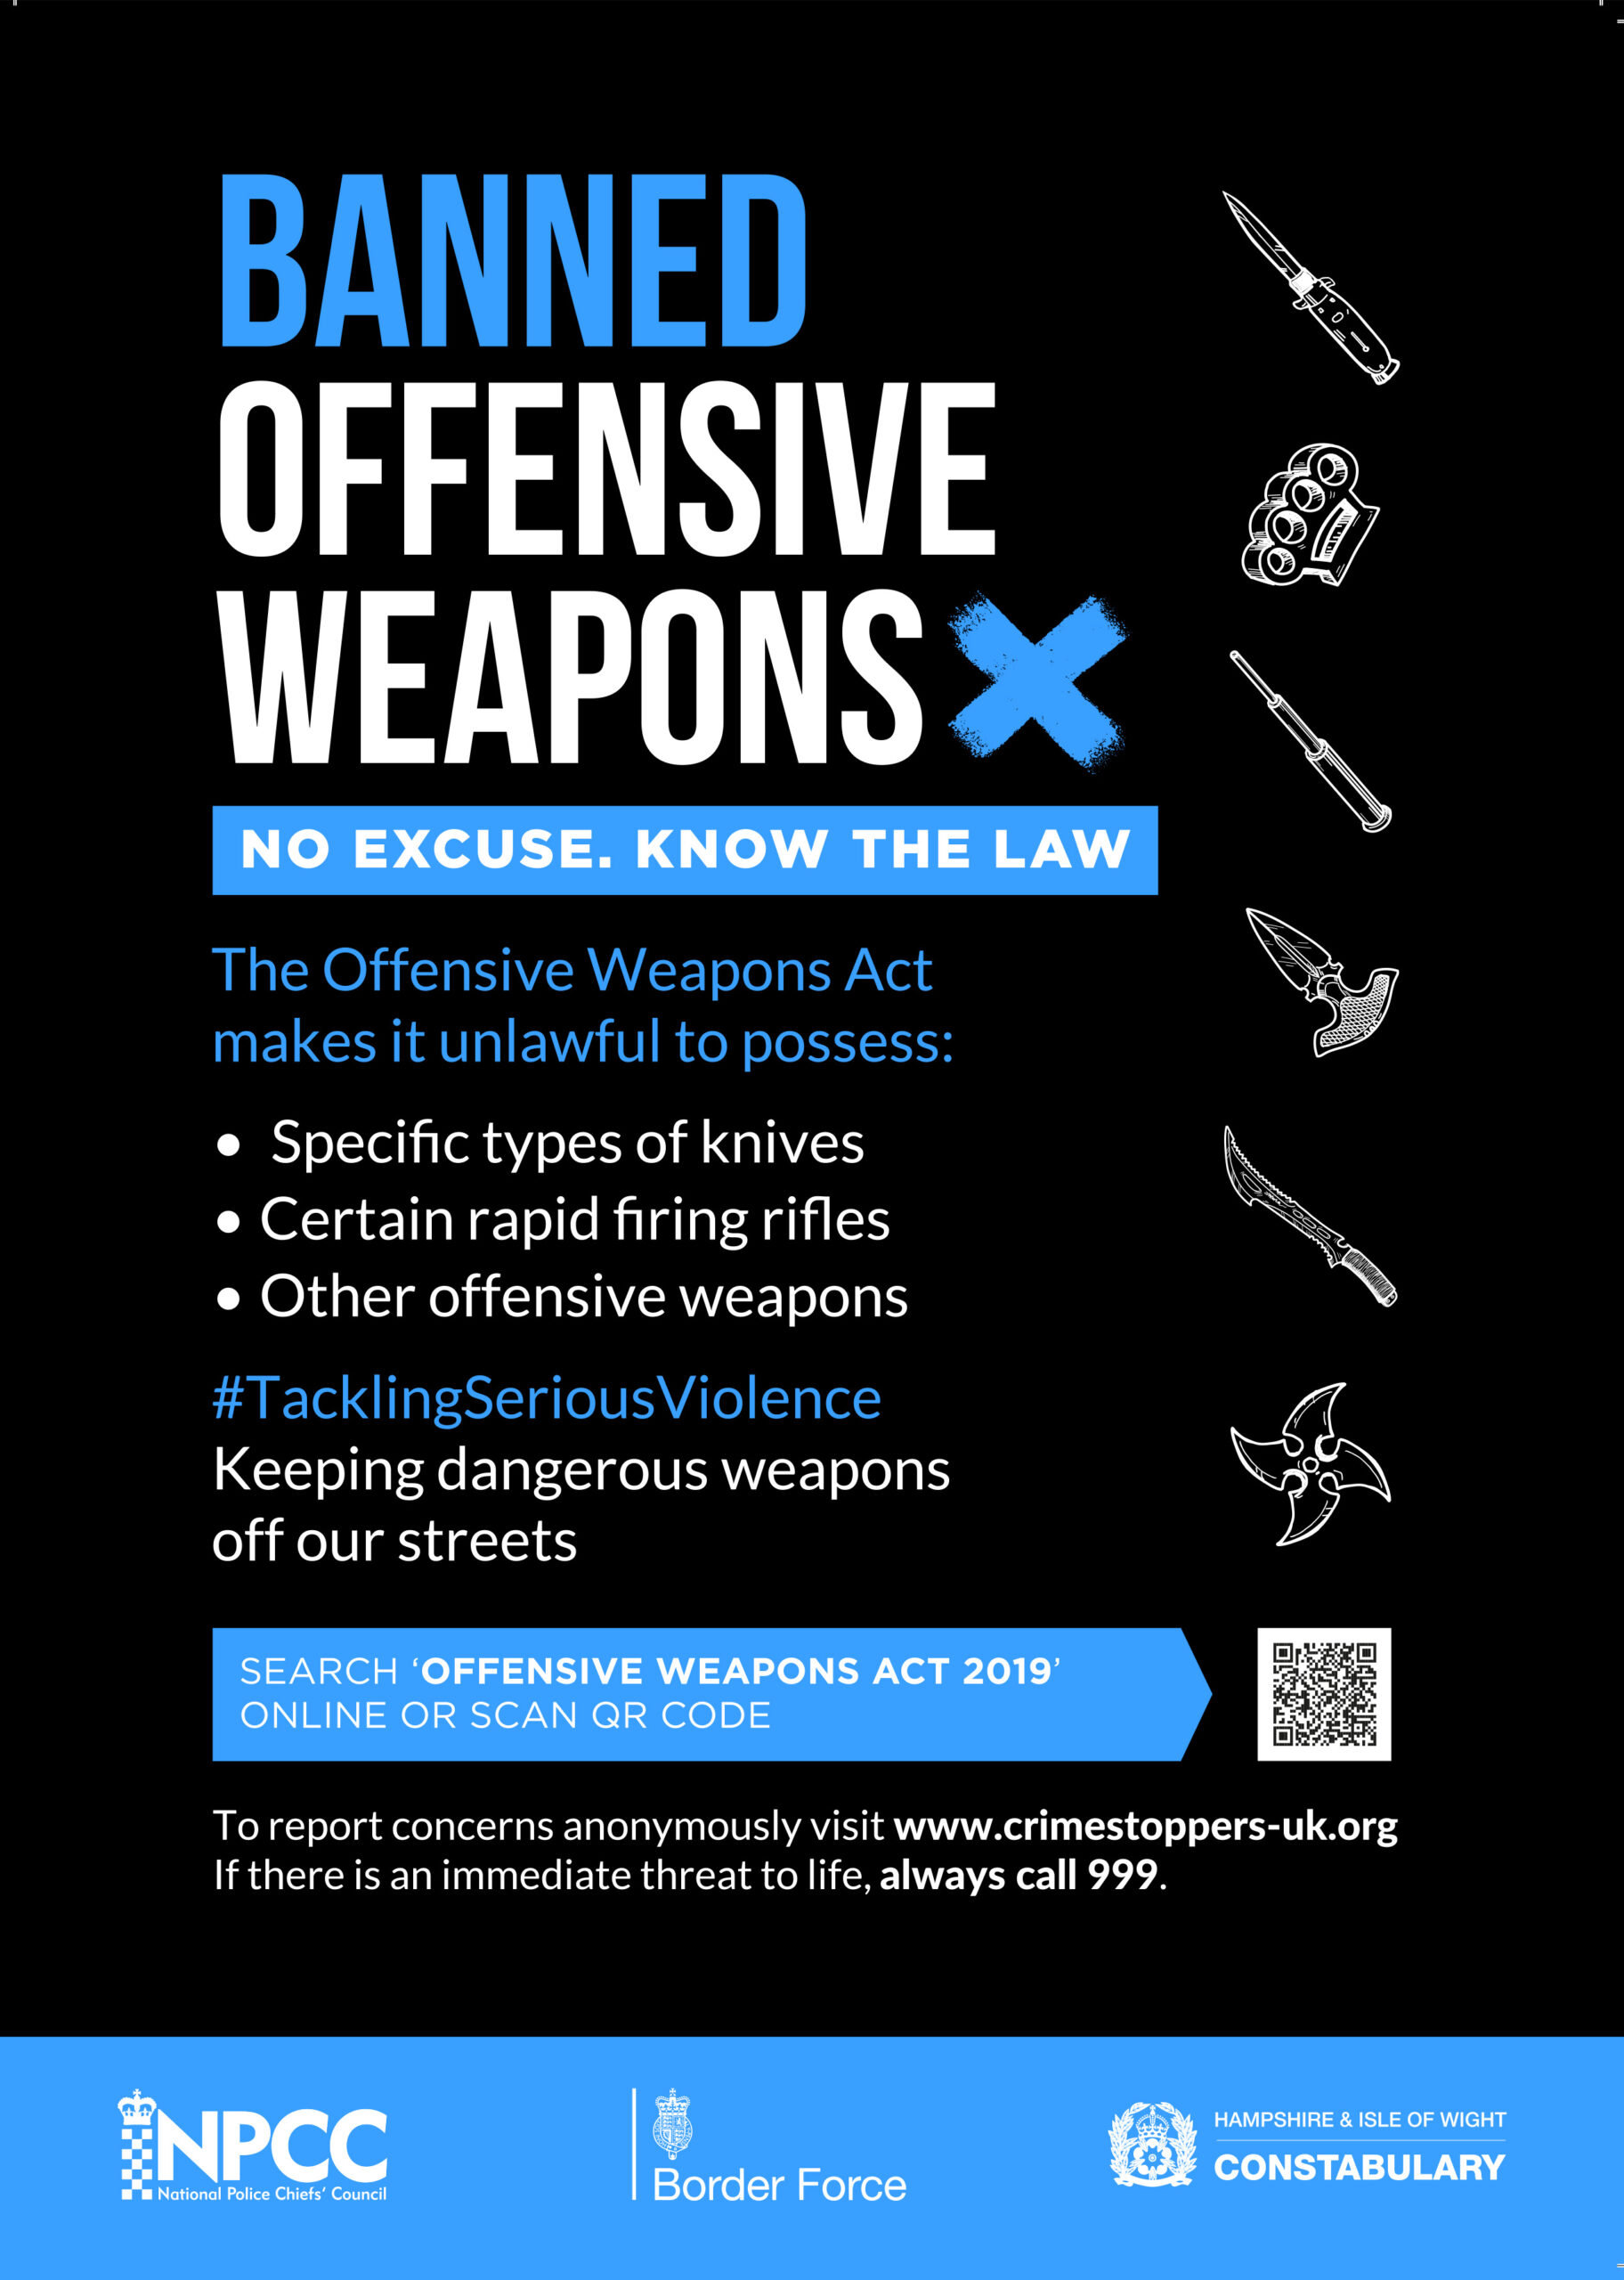 Operation Sceptre leads to 281 fewer weapons on the streets